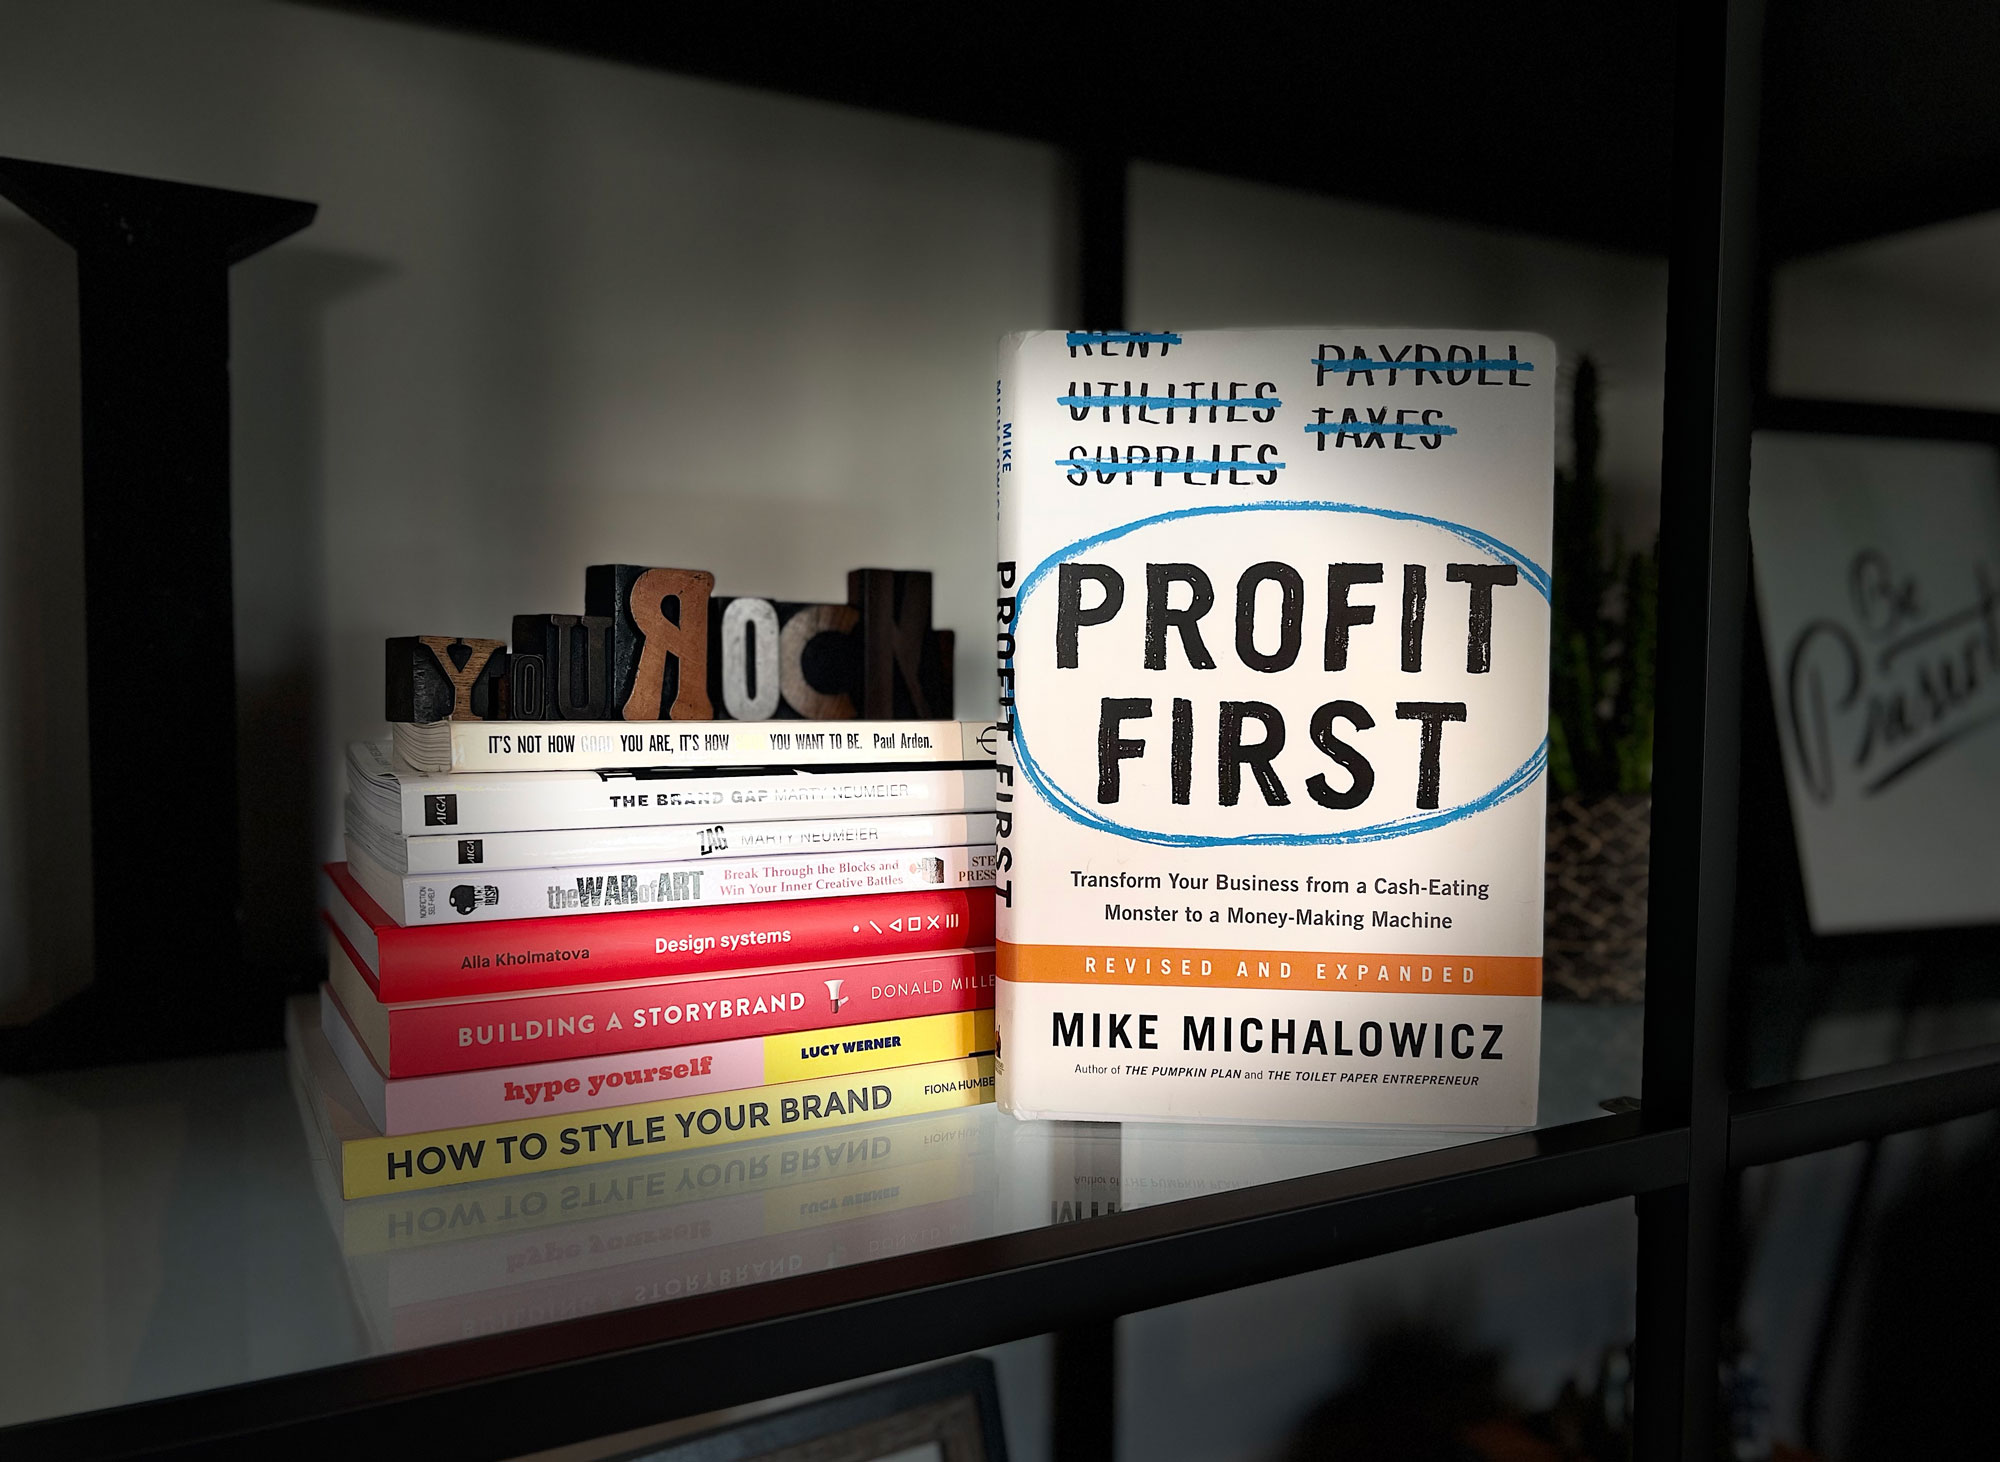 The book Profit First on a shelf with some other books